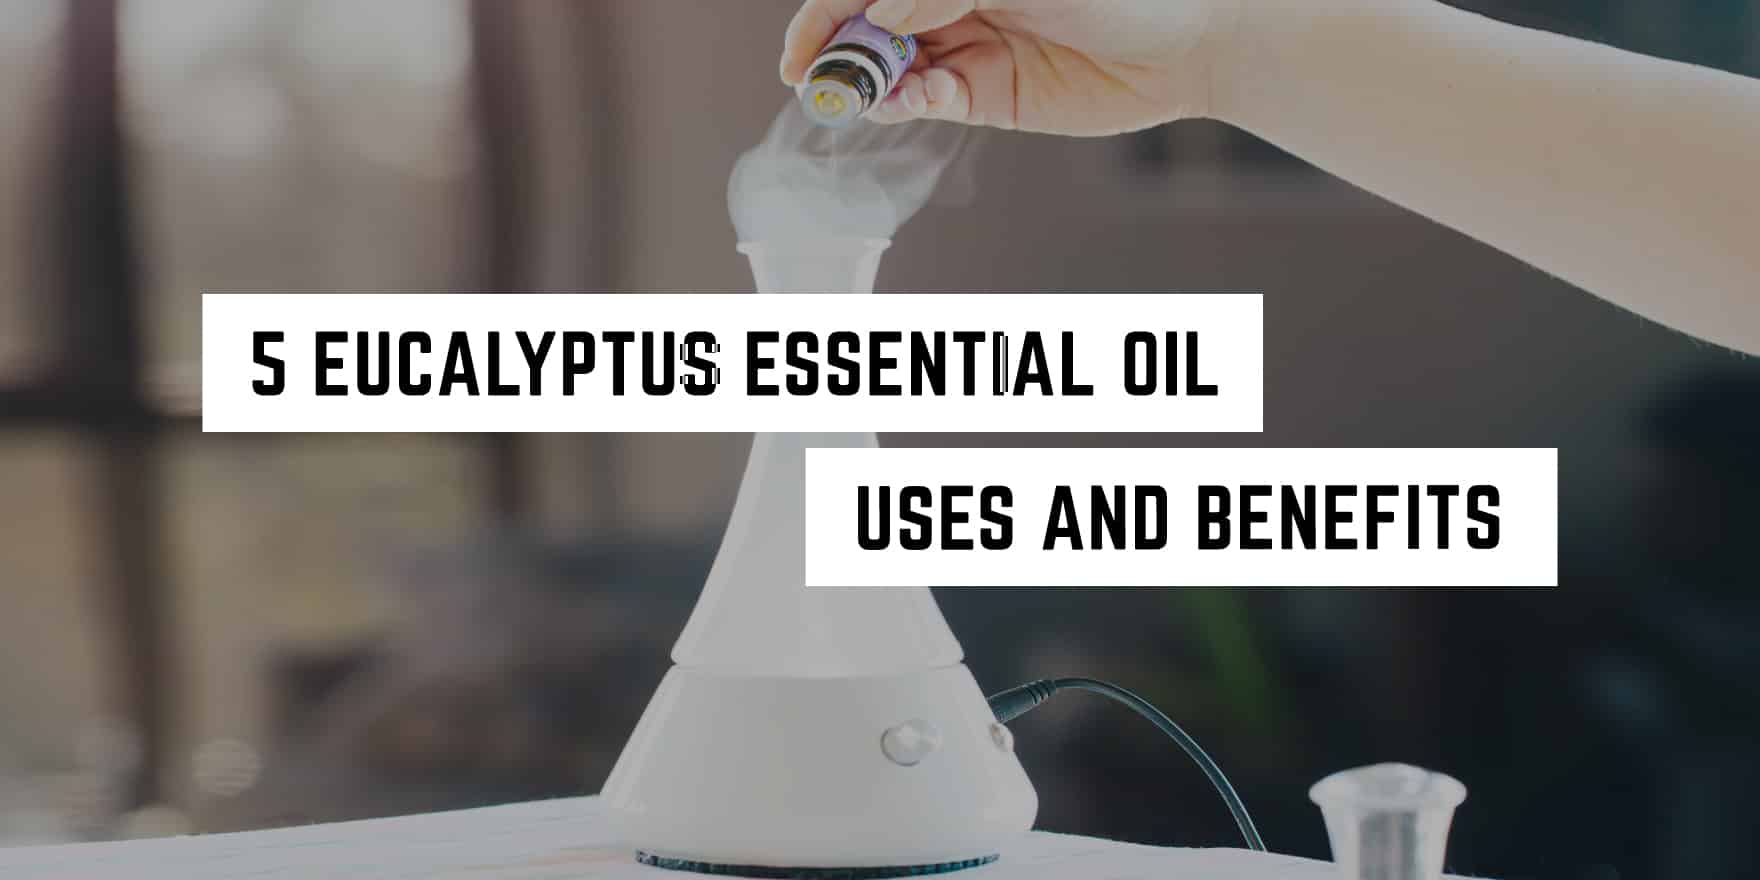 A bottle of essential oil being poured into a diffuser with text overlay "5 witchy eucalyptus essential oil uses and benefits".